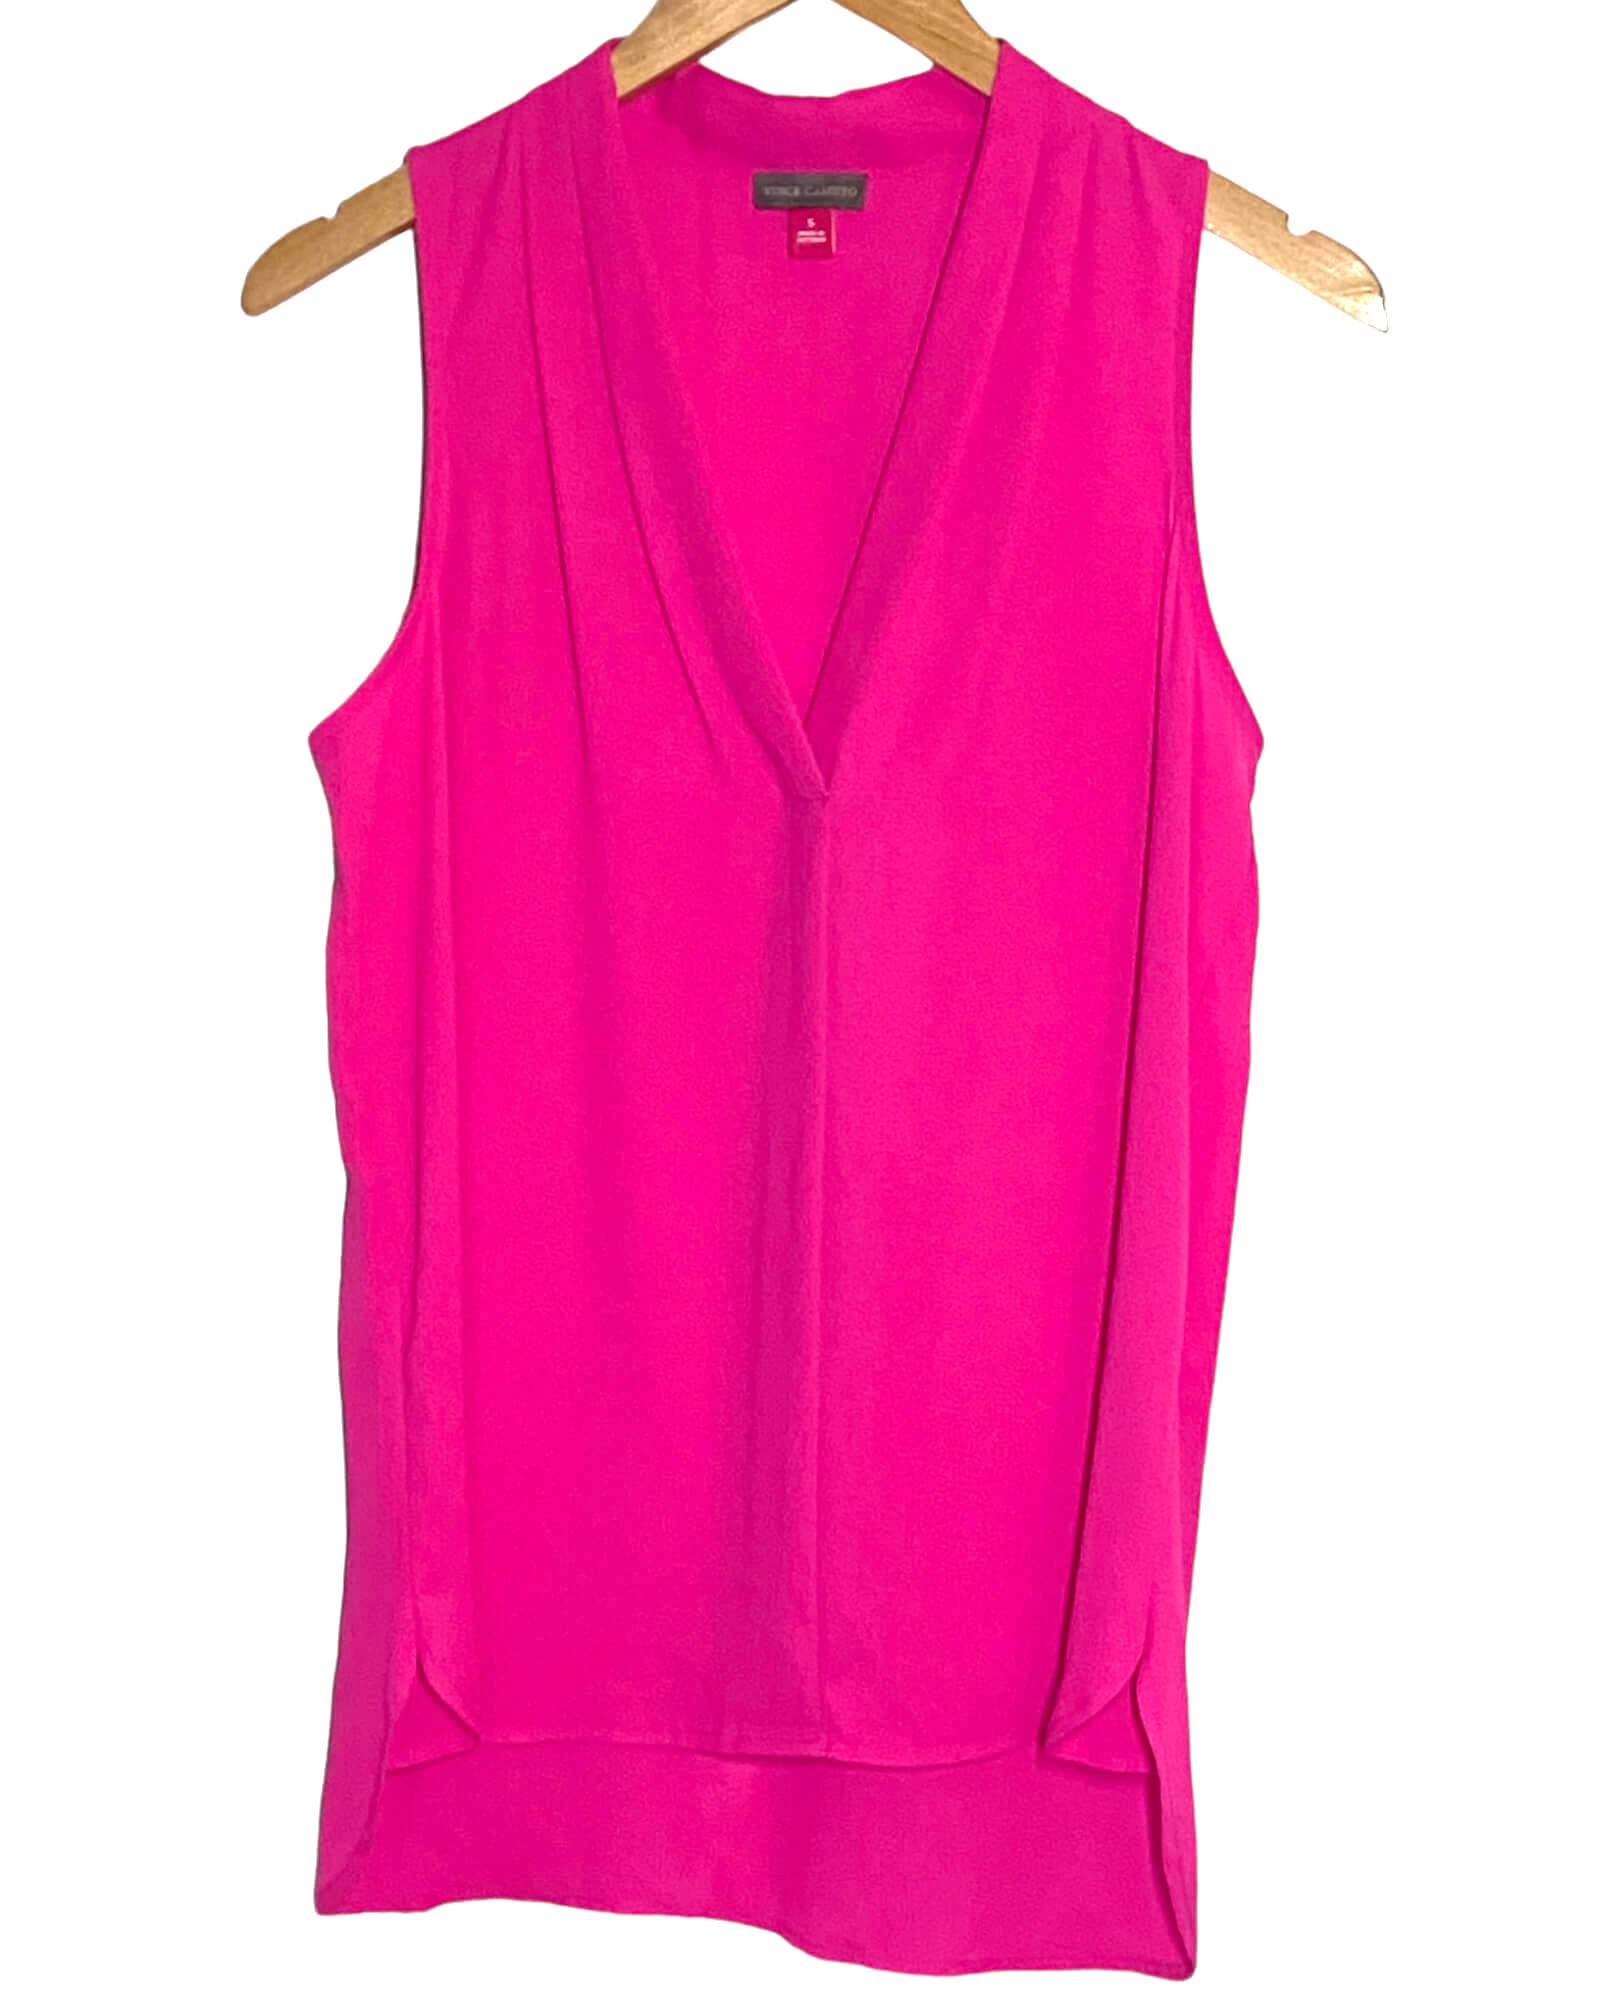 Bright Spring VINCE CAMUTO v-neck sleeveless pleated top blouse